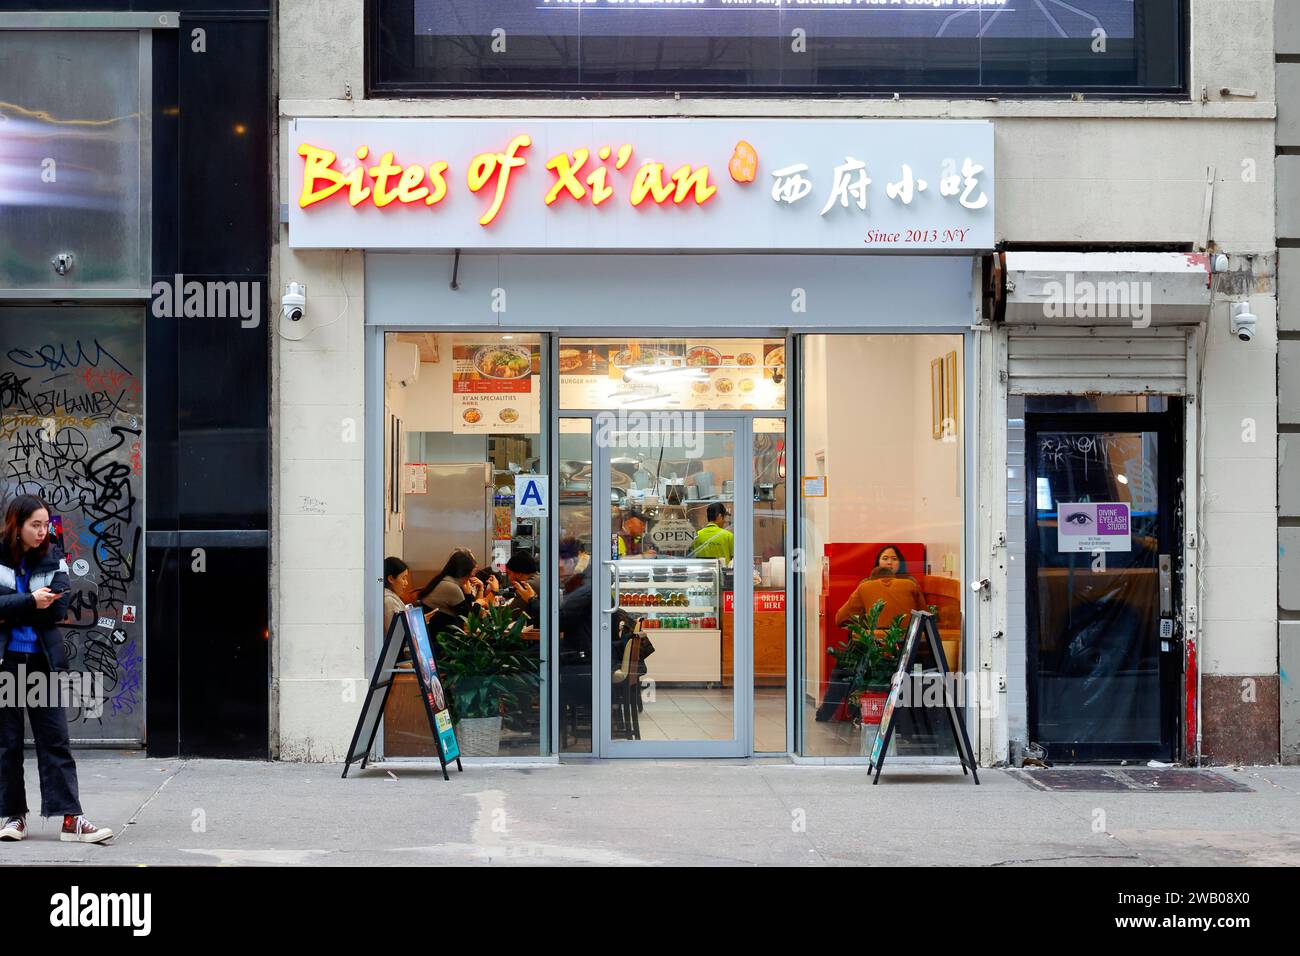 Bites of Xi'an 西府小吃, 884 6th Ave, New York, NYC vitrine d'un restaurant chinois Shaanxi dans Midtown Manhattan. Banque D'Images